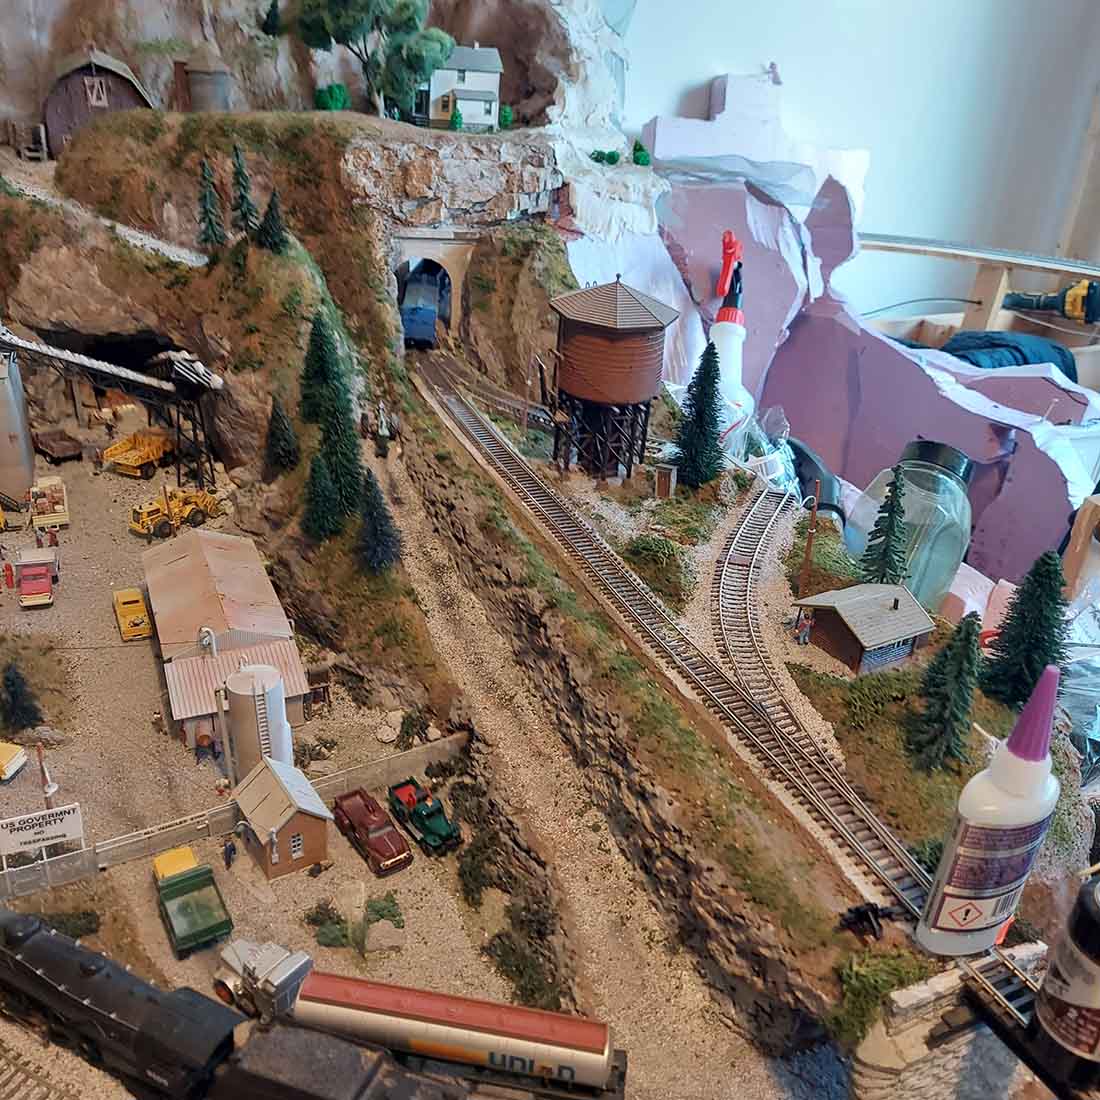 HO scale layout with turnouts